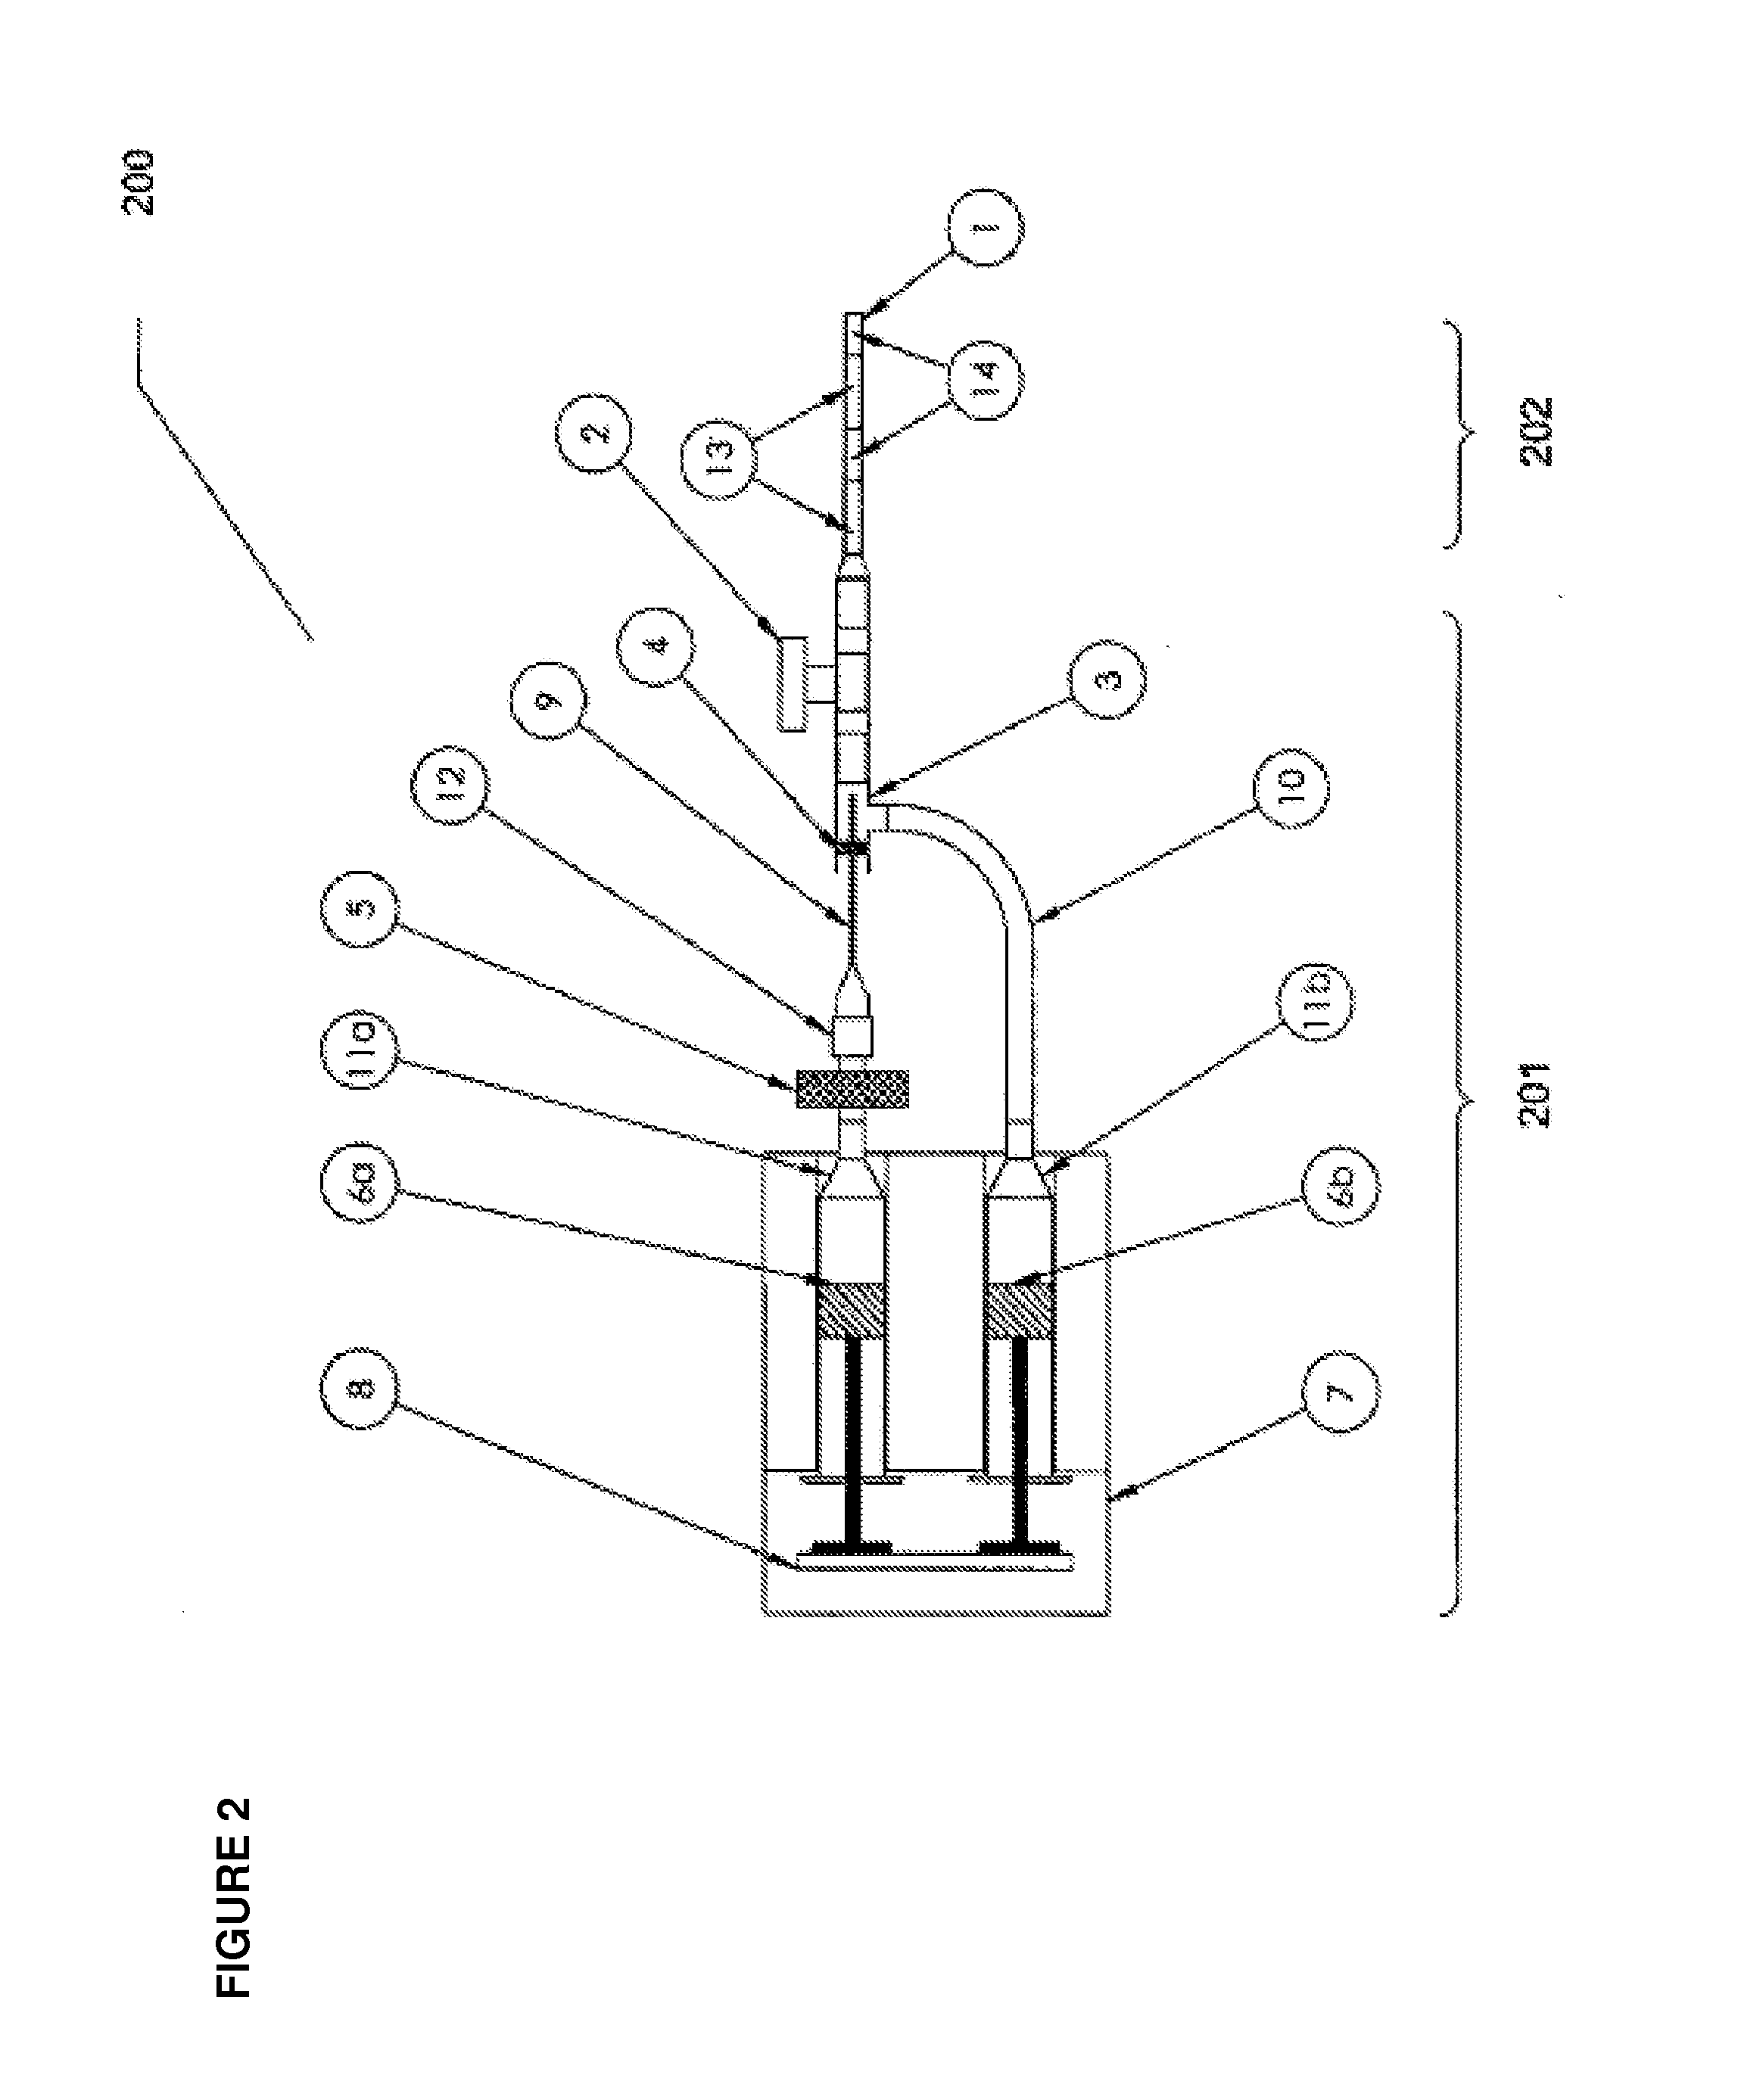 Method and Devices for Sonographic Imaging